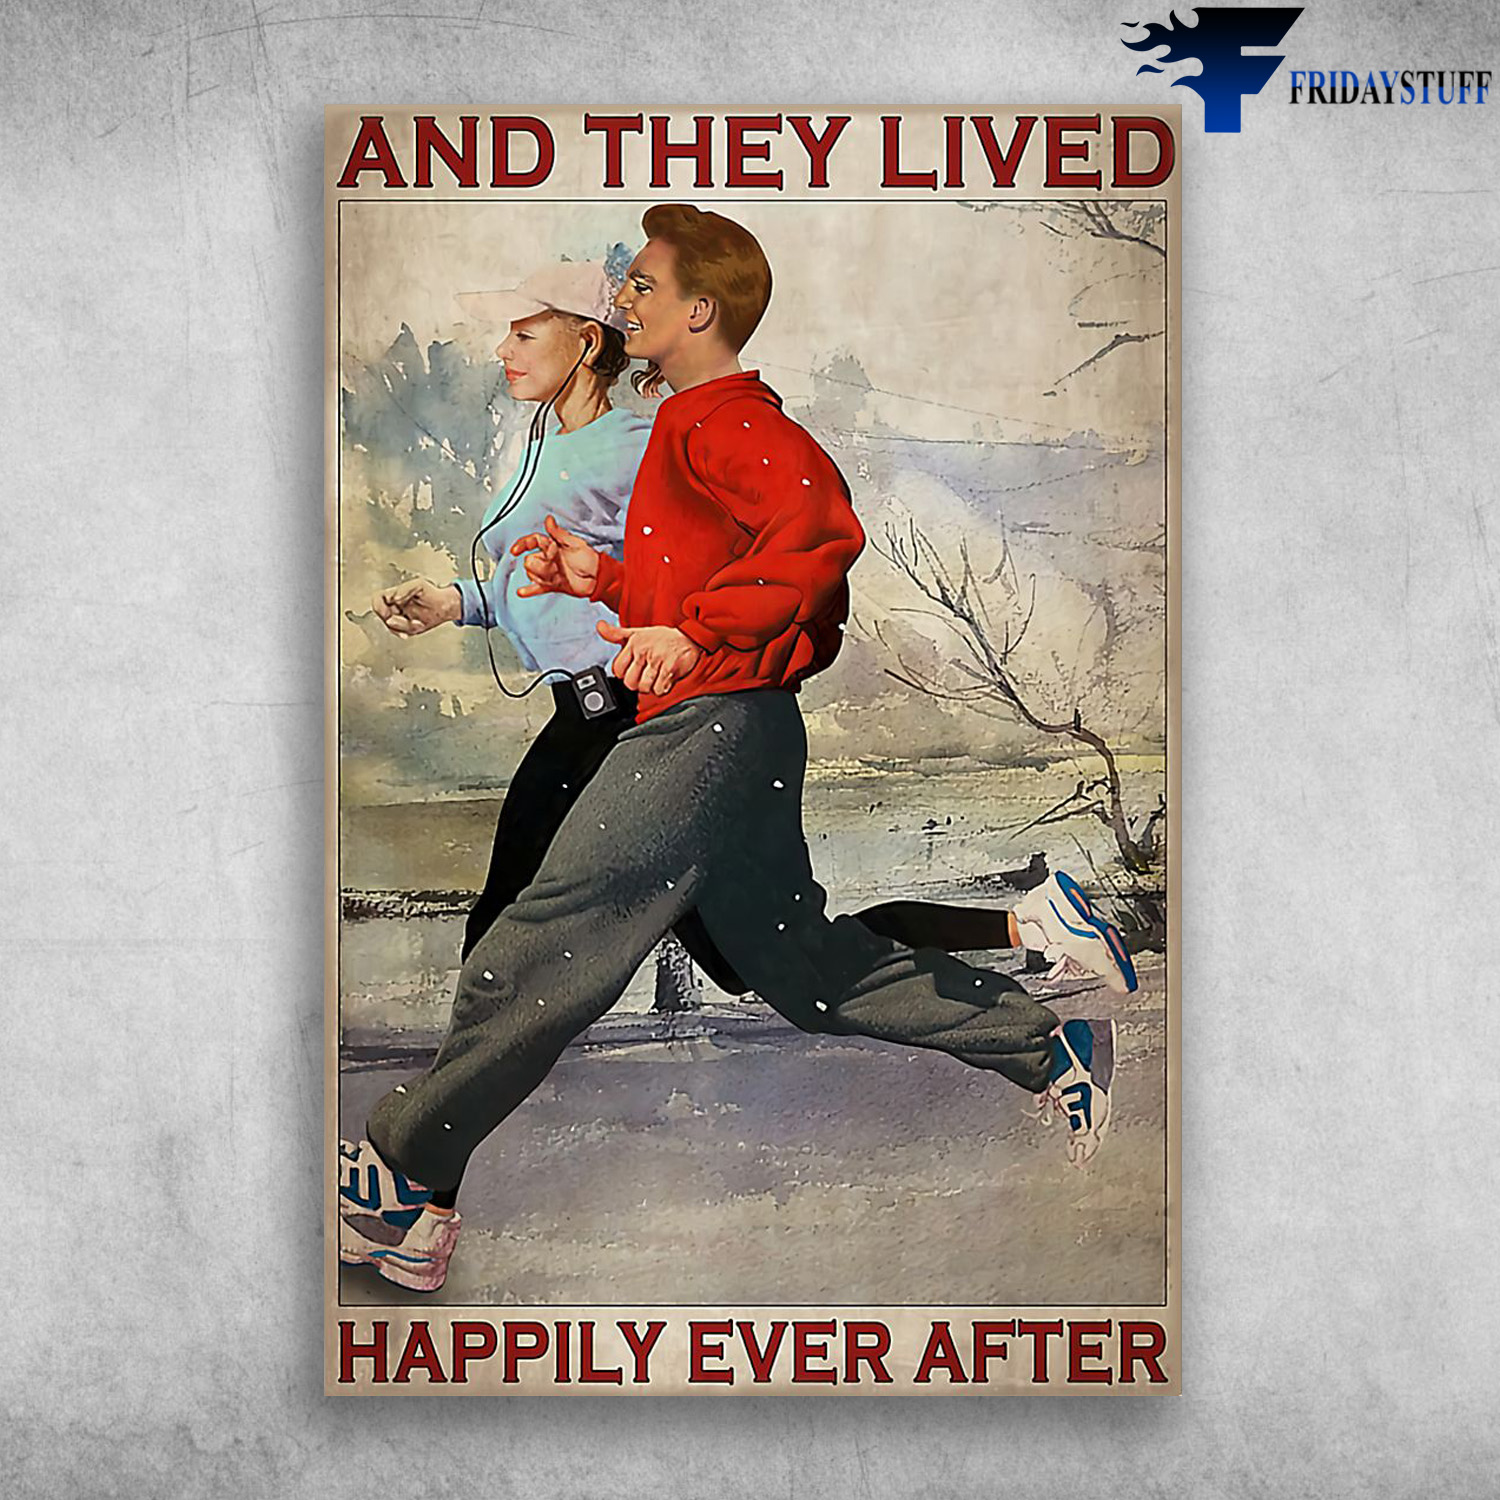 Couple Running - And They Lived, Happily Ever After